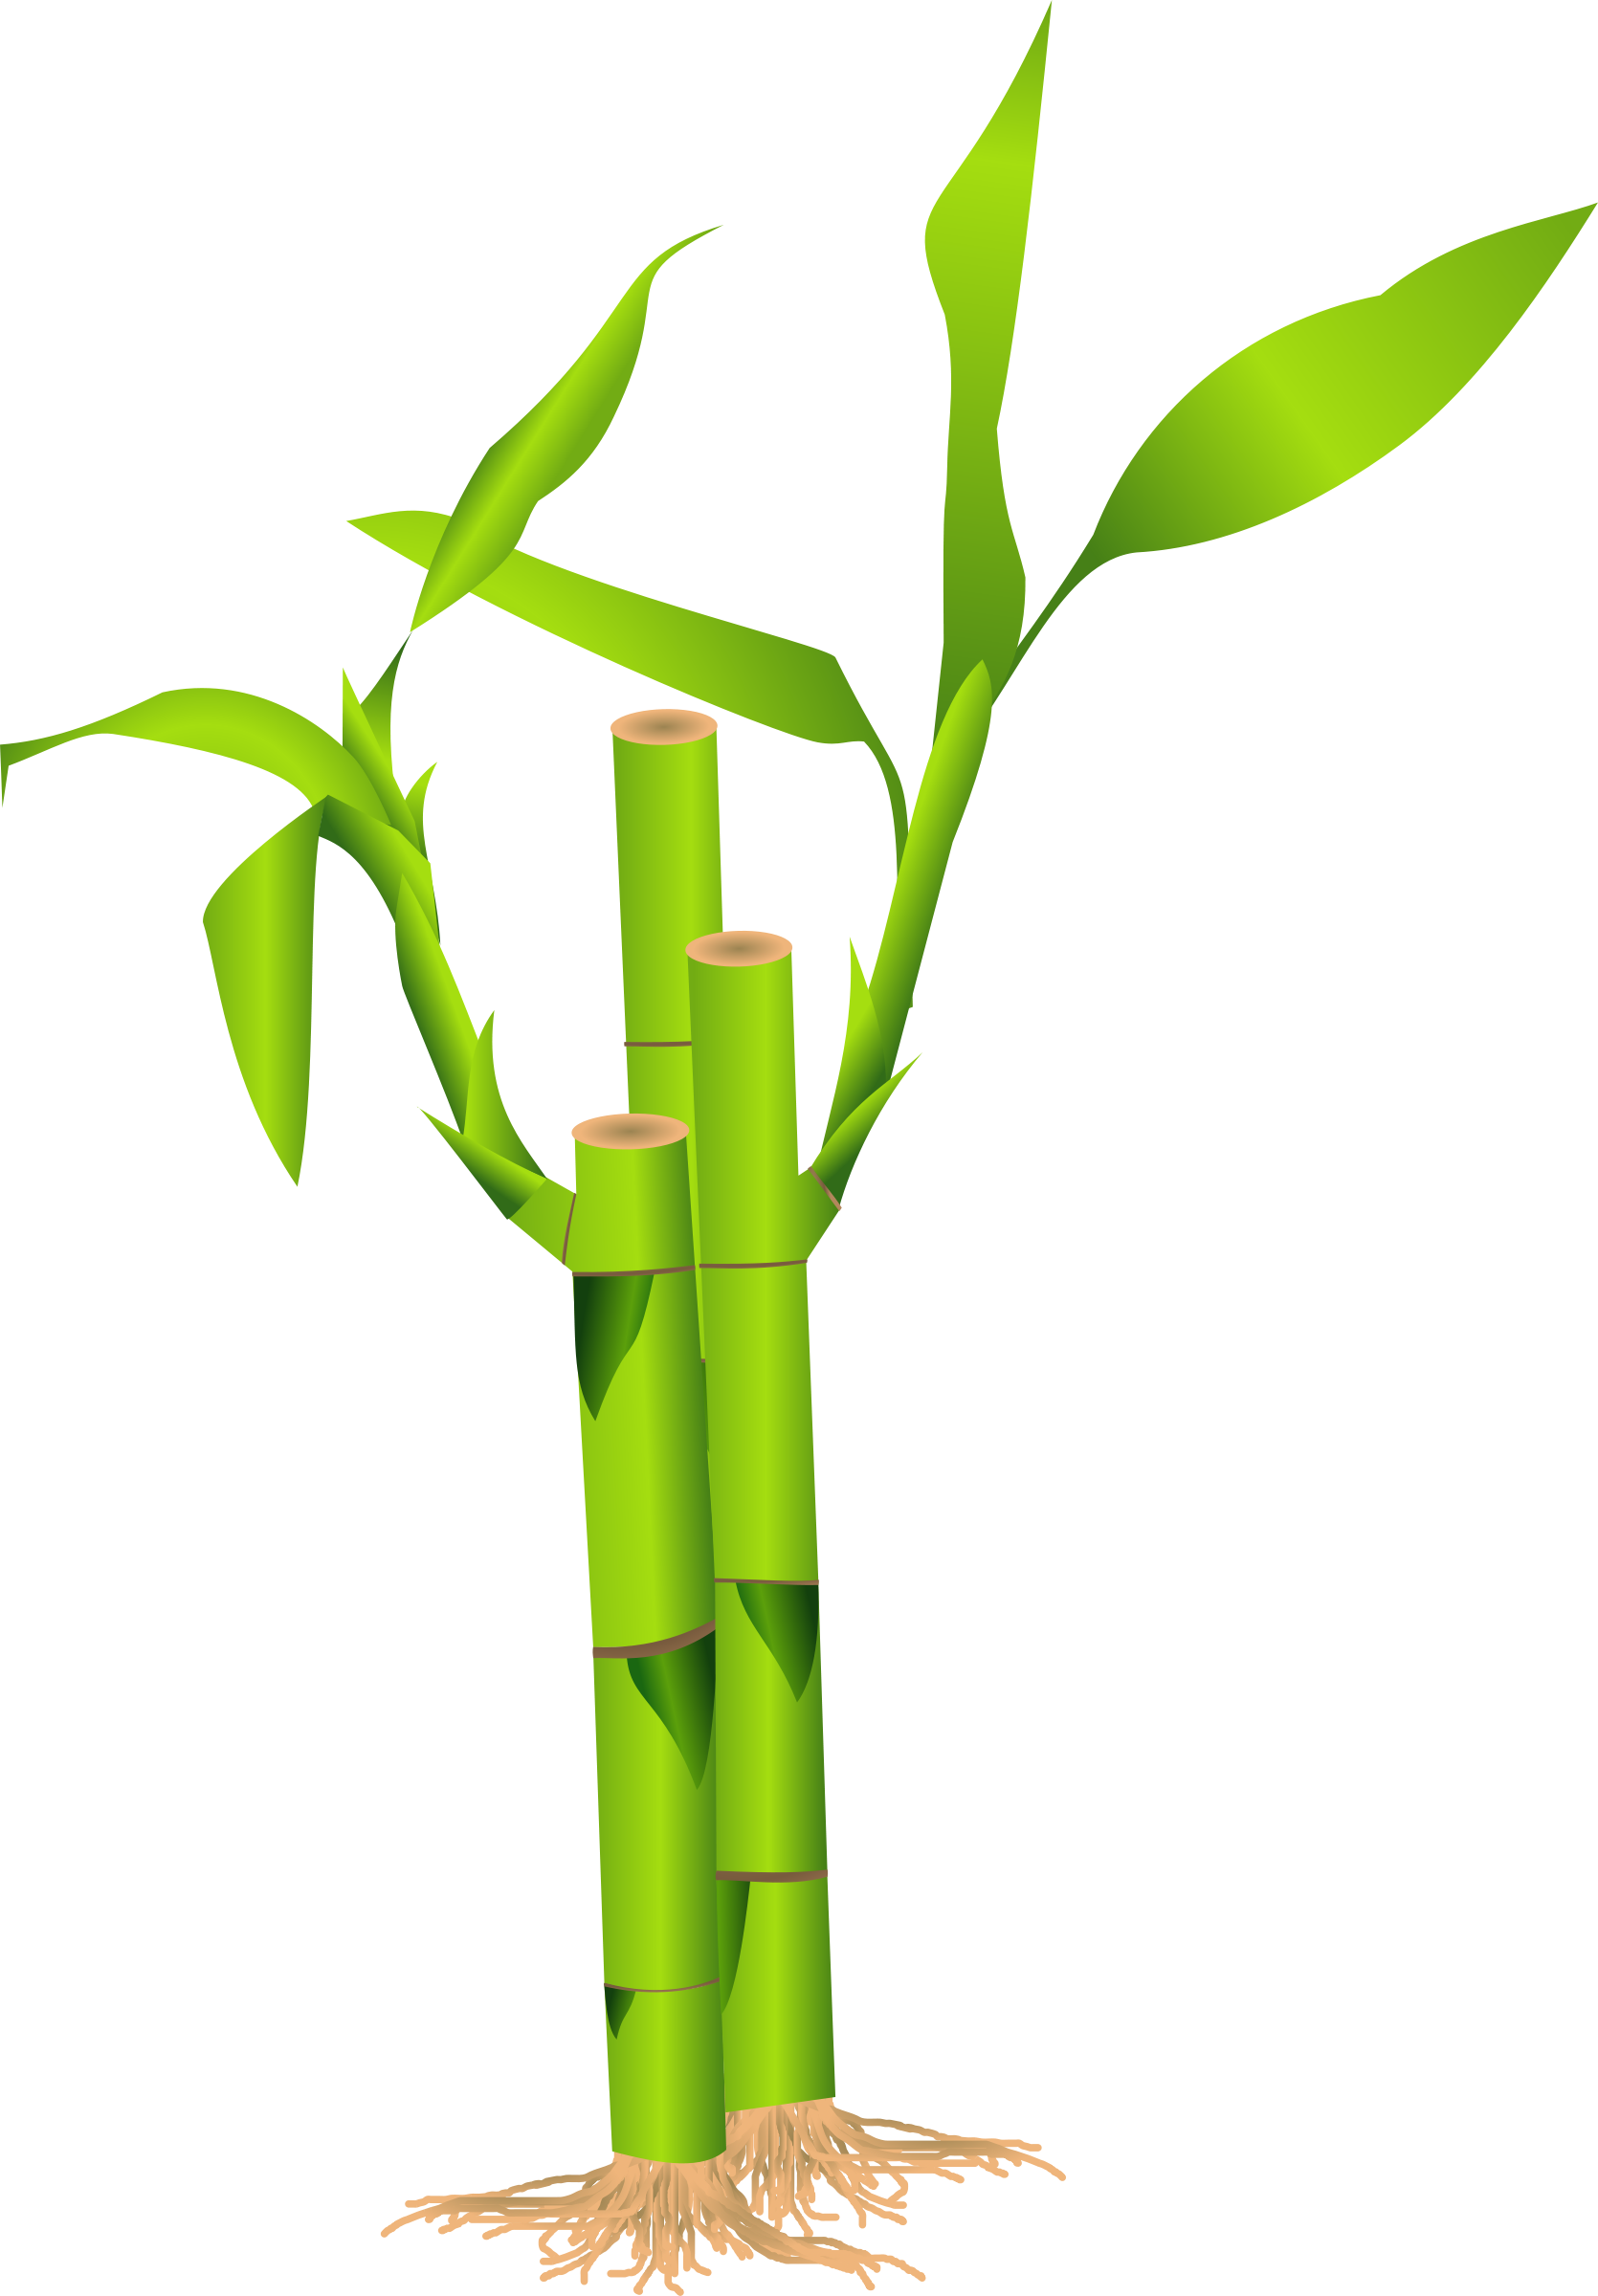 Bamboo Border Free Download - ClipArt Best